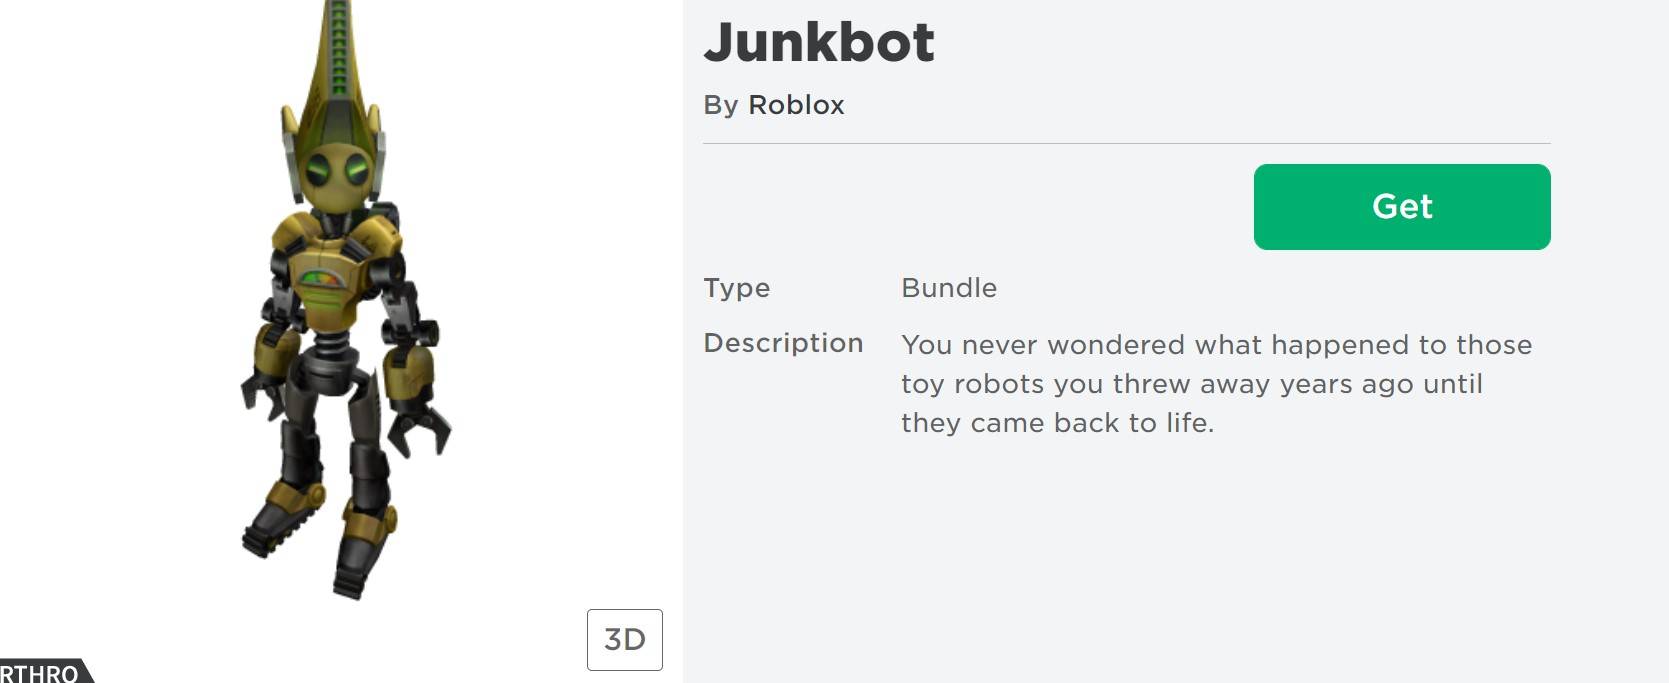 Roblox Promo Codes For Free Items In June 2021 - free things in the catalog for roblox